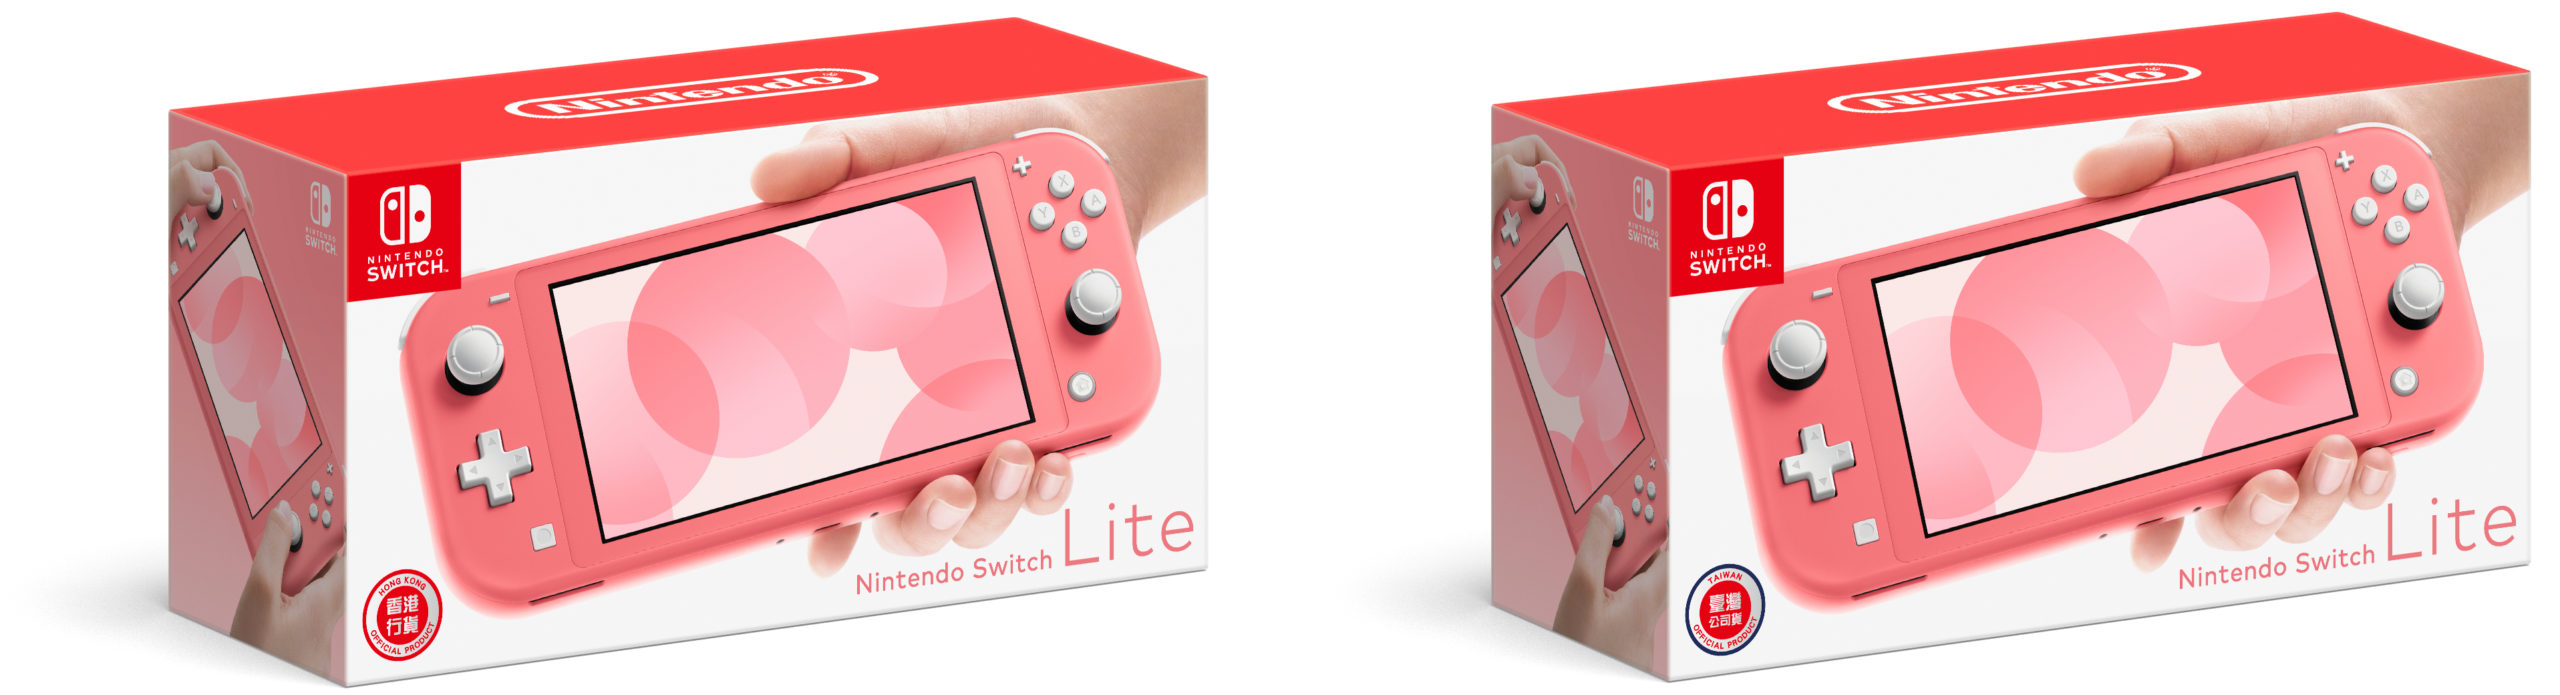 what comes in the nintendo switch lite box